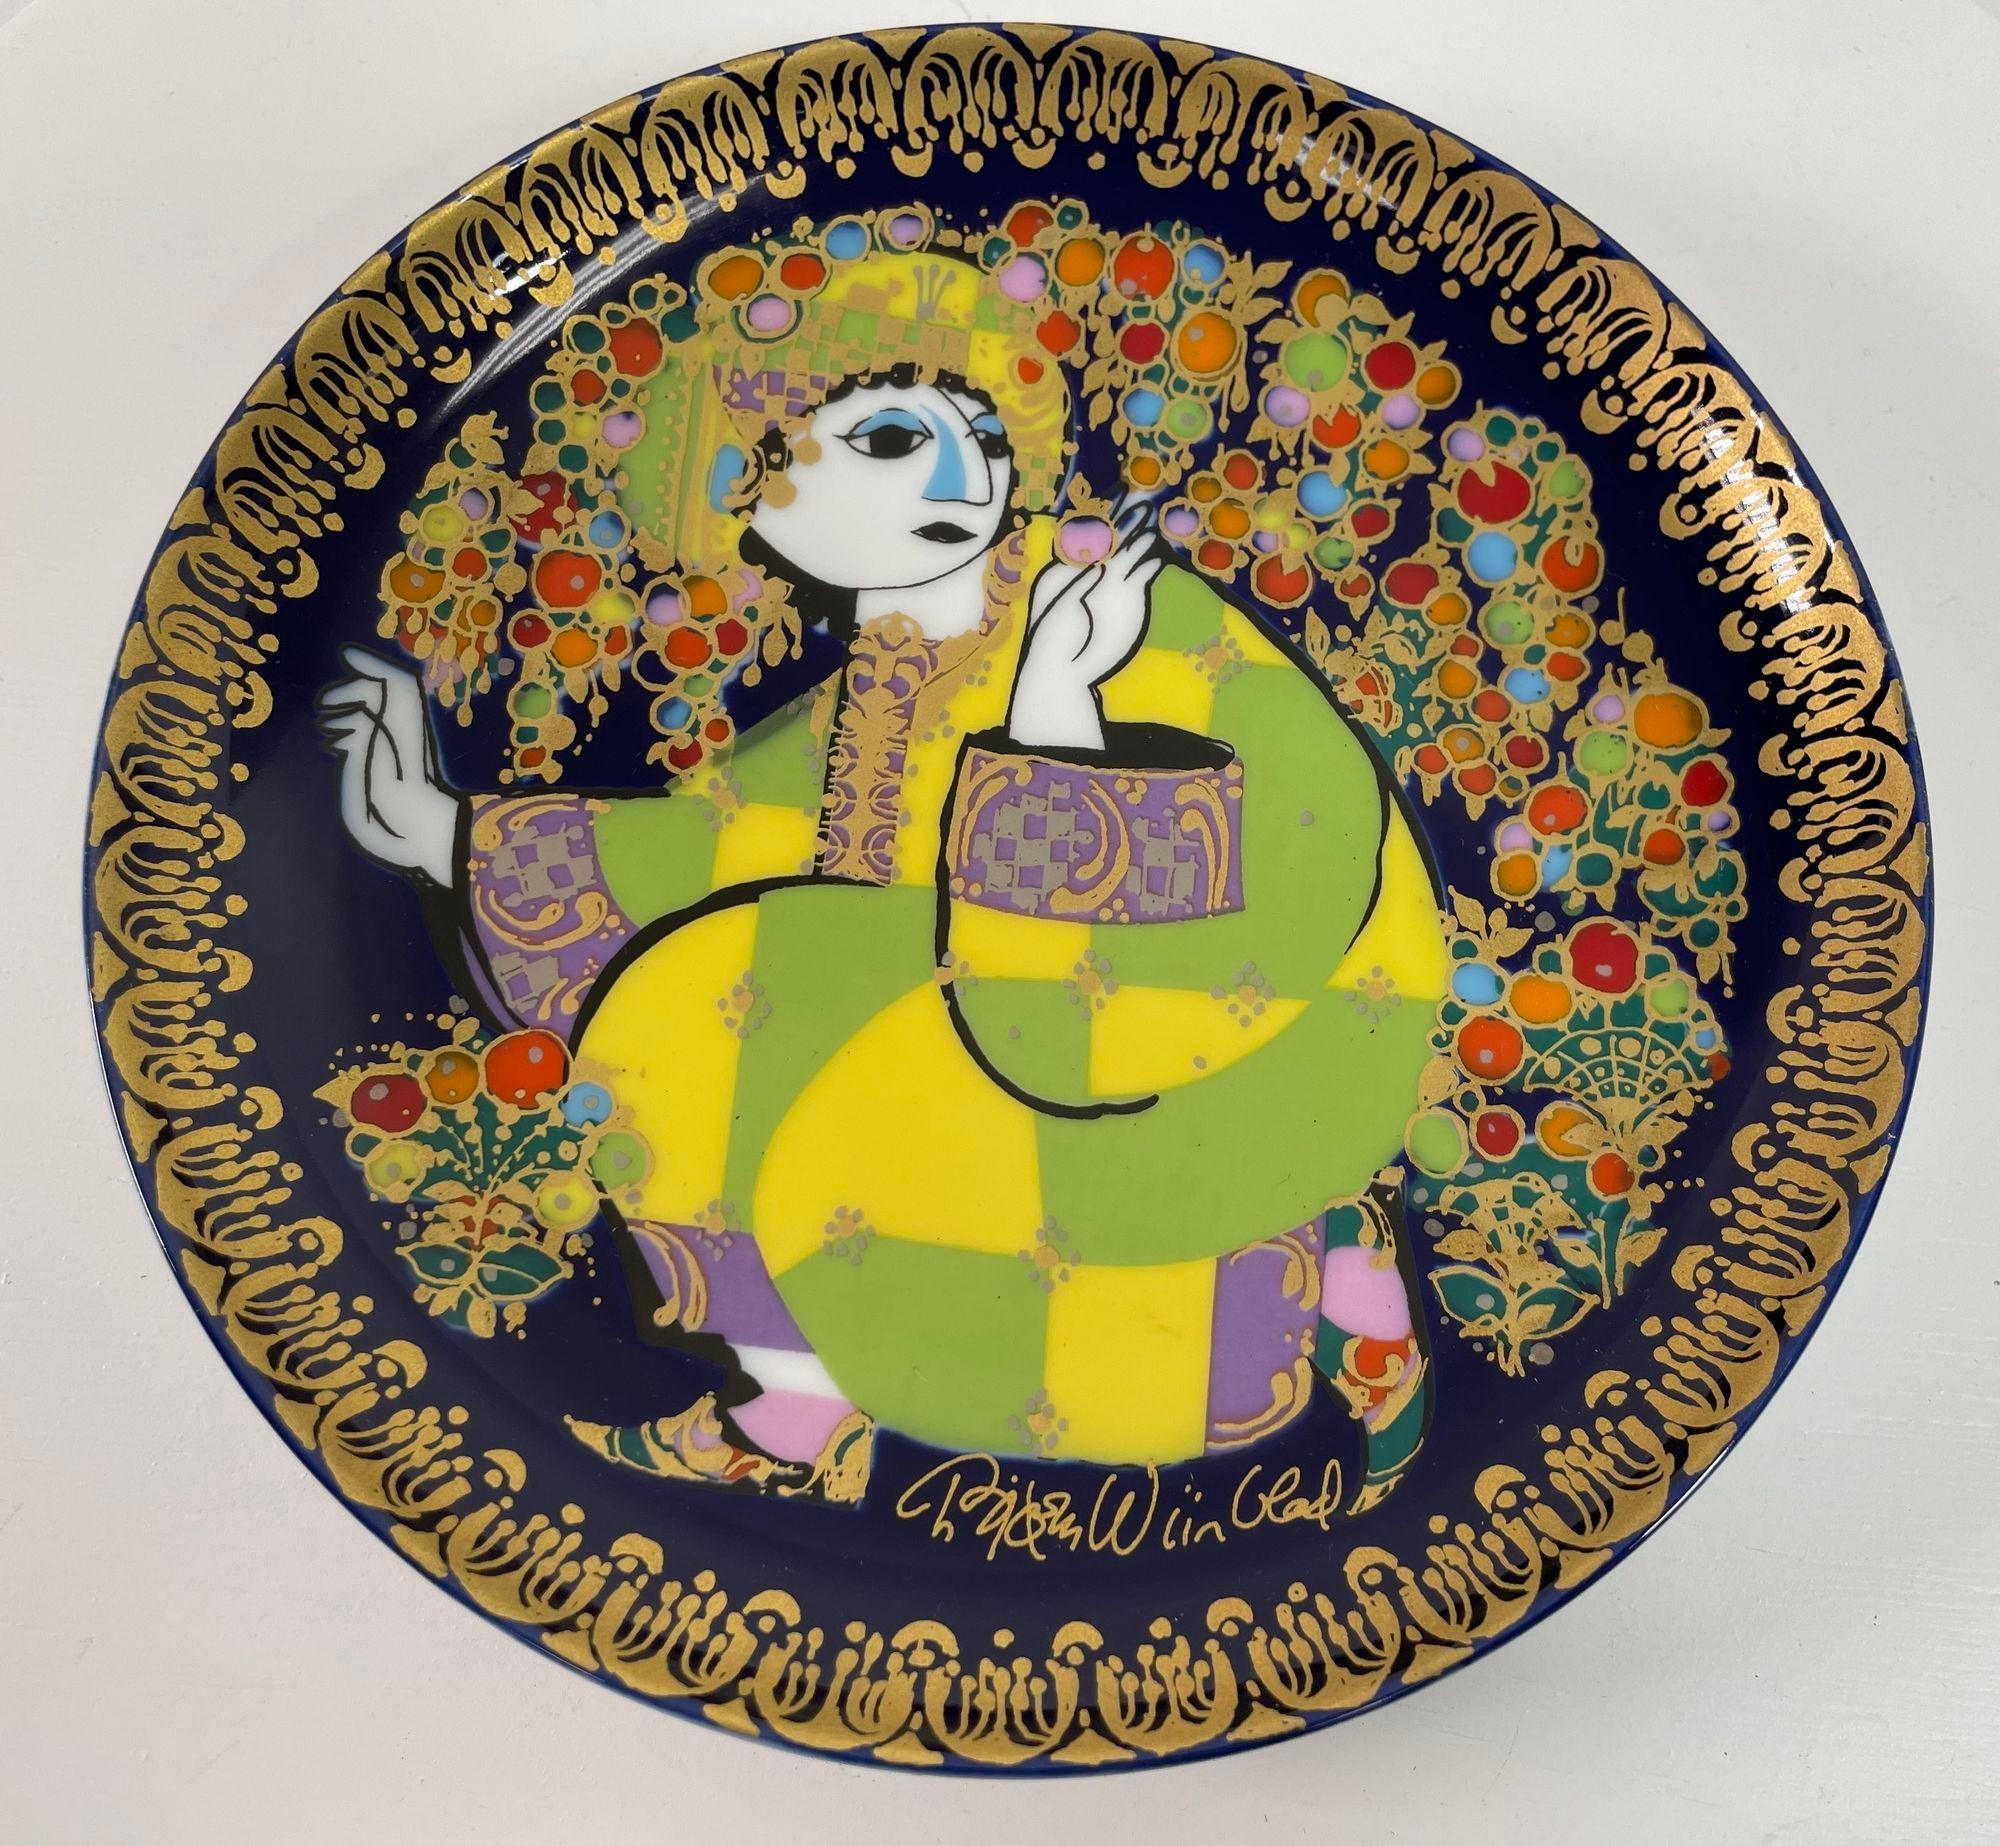 Bjørn Wiinblad wall Plate, produced by Rosenthal.
ALADIN in the Enchanted Garden #4 Wall Plate Bjorn Wiinblad Rosenthal.
Vintage porcelain collector plate by Rosenthal Studio Line, Germany from the series 